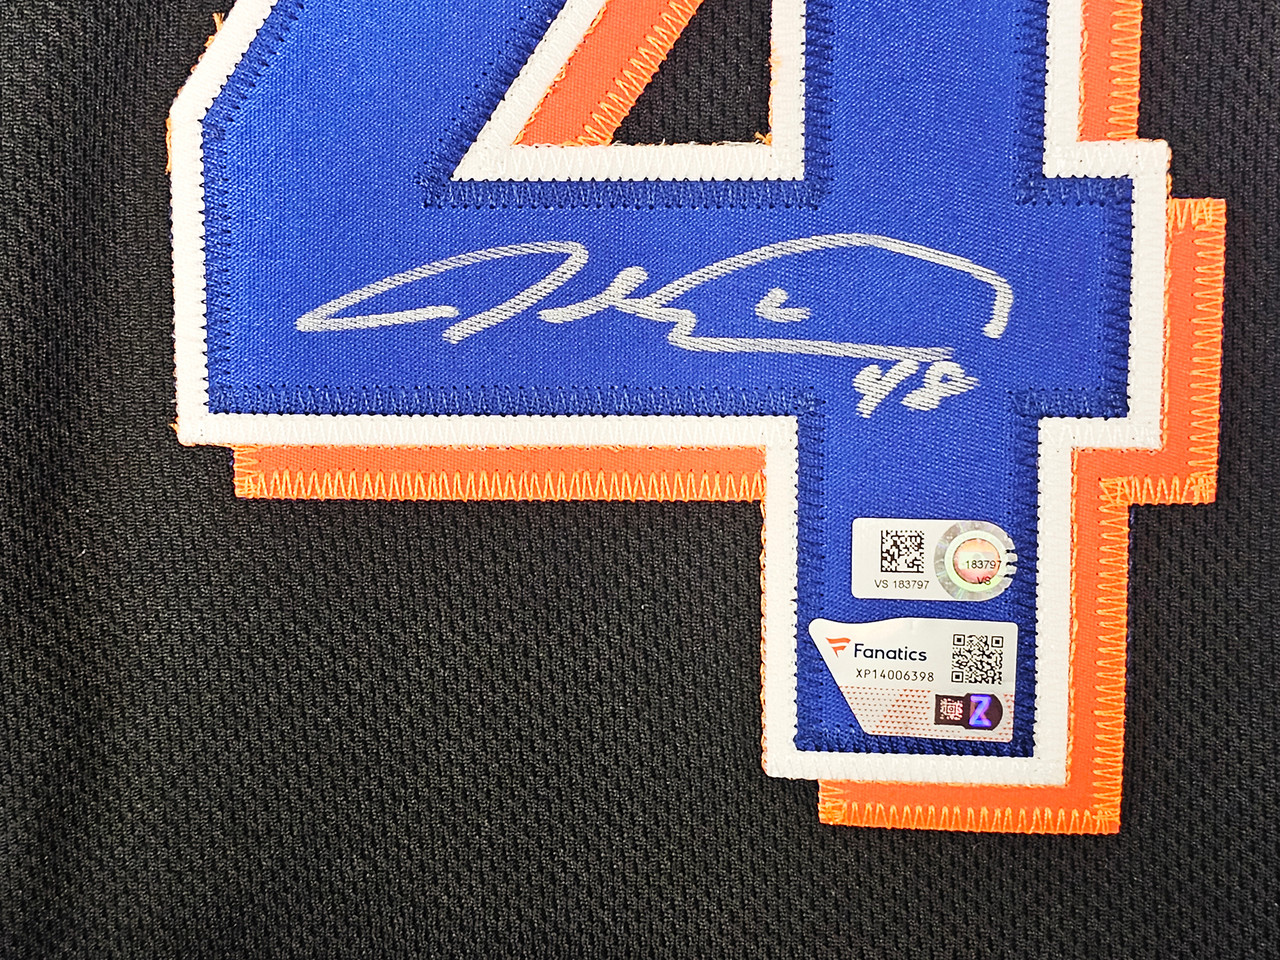 New York Mets Jacob deGrom Autographed White Nike Authentic Jersey Size 44  18-19 NL CY Fanatics Holo Stock #218734